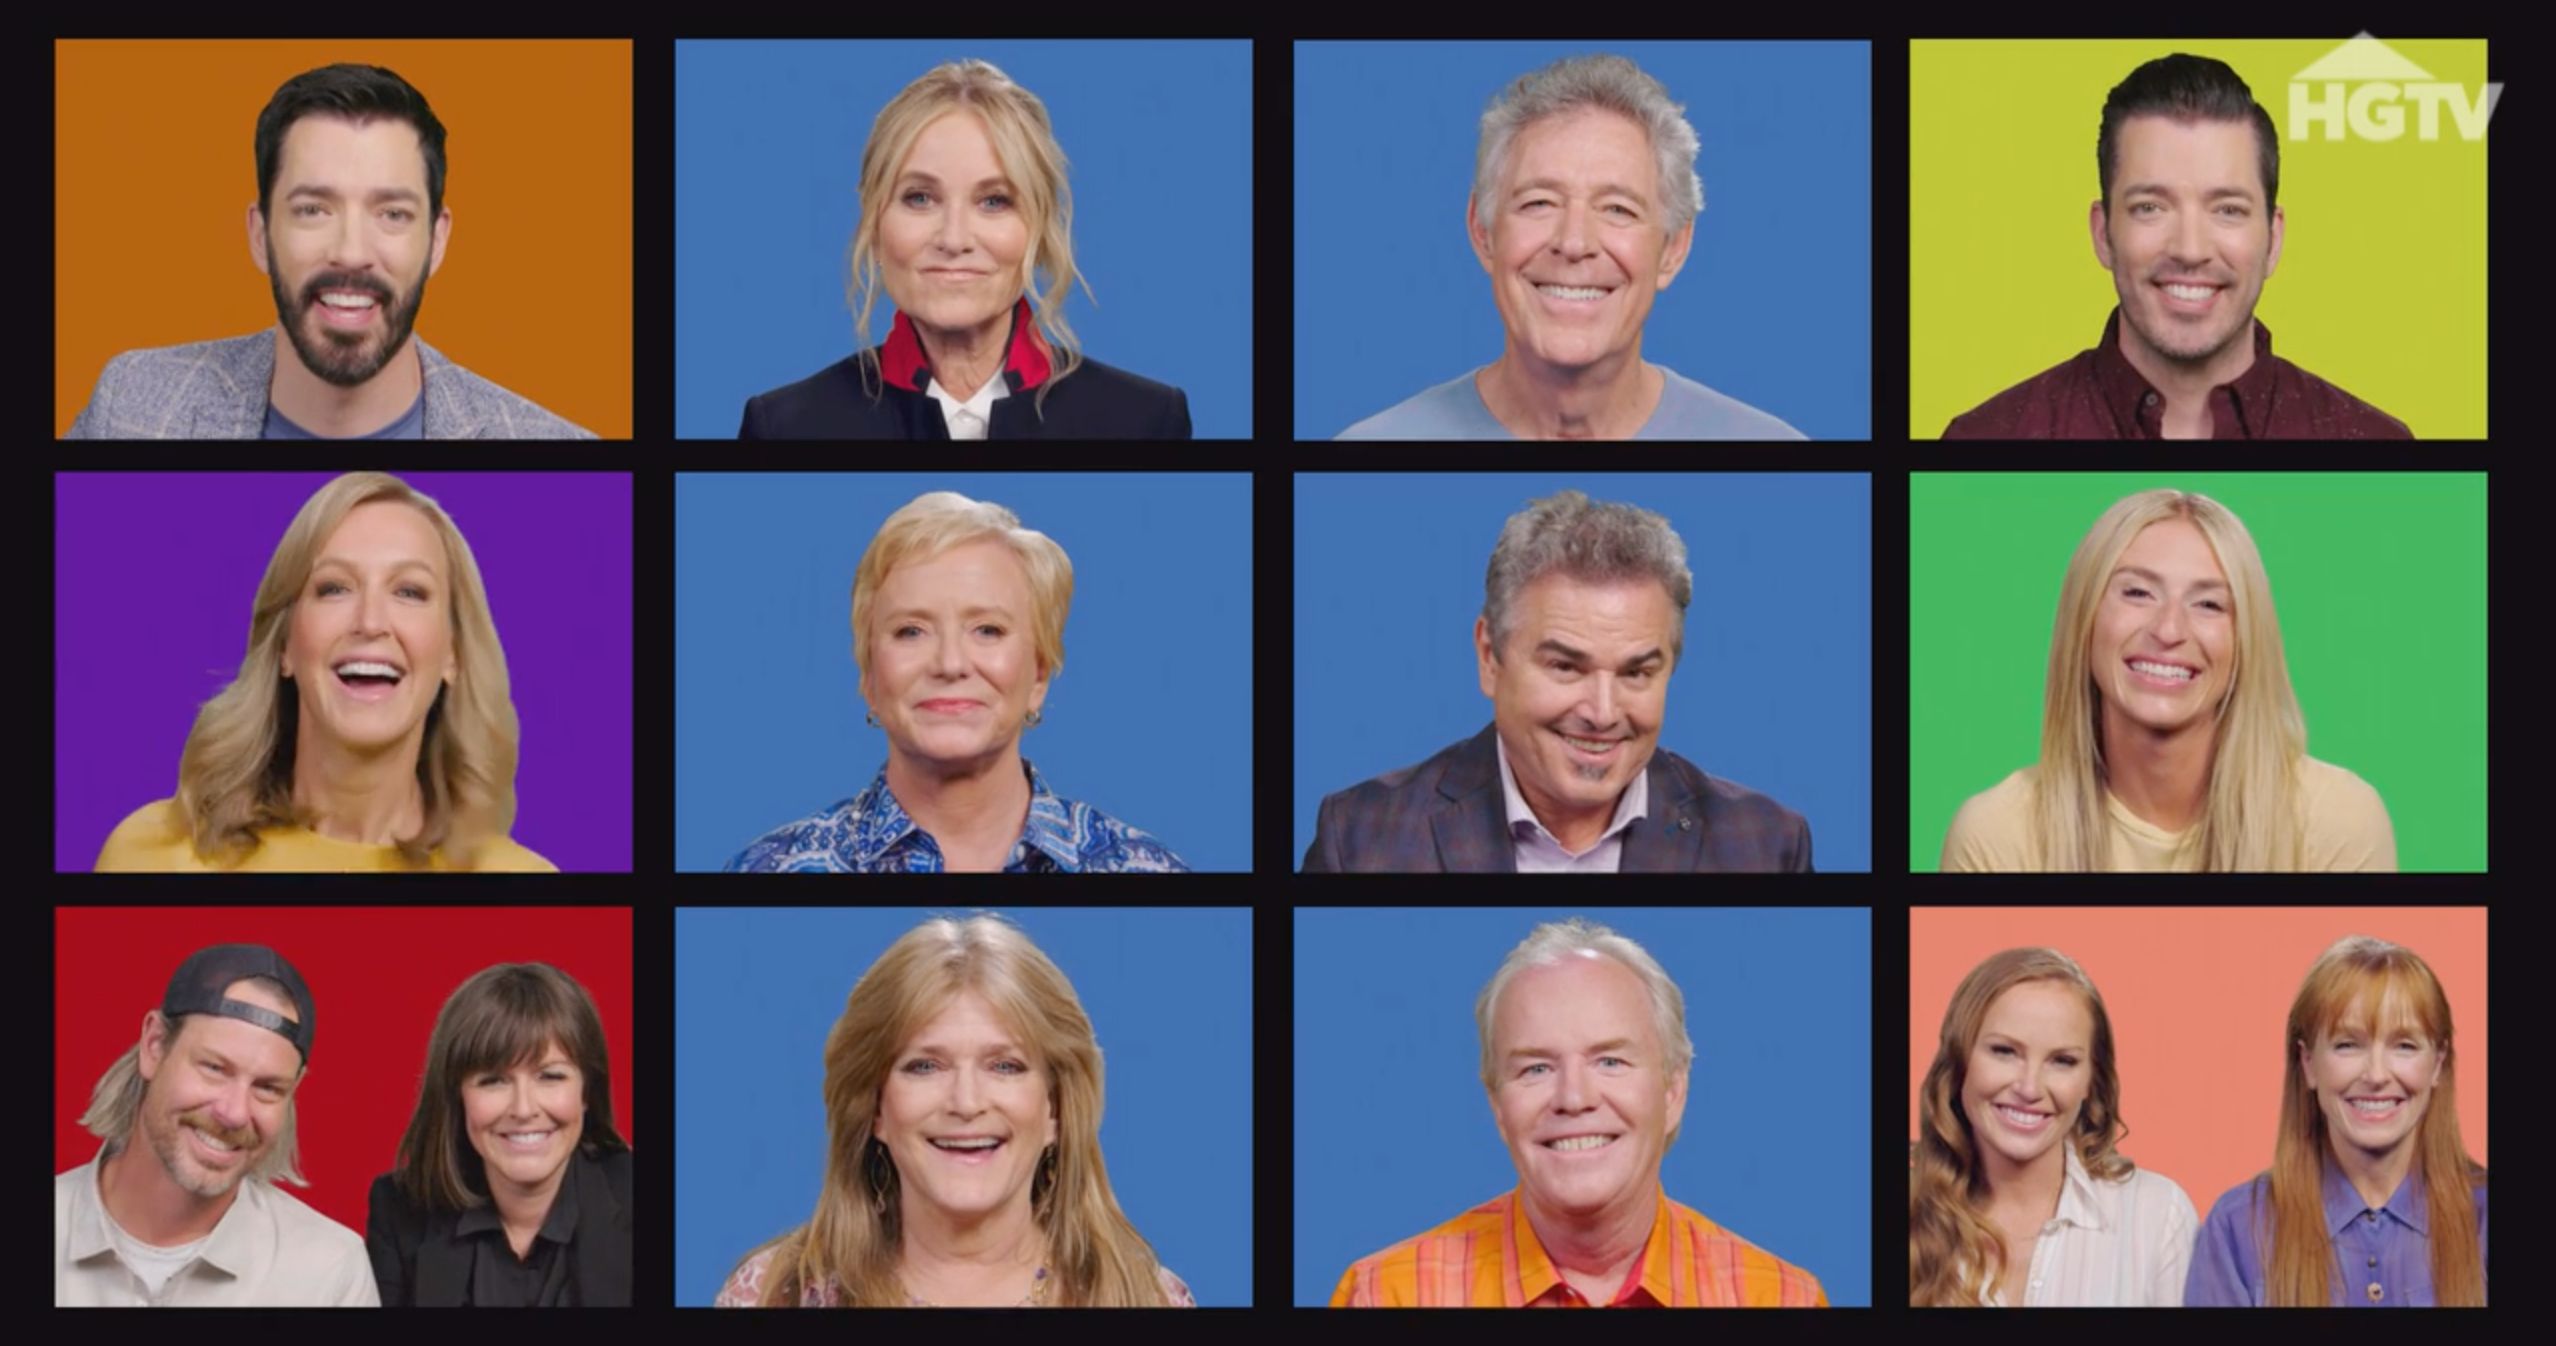 The Brady Bunch Cast Recreates Iconic Theme Song for New HGTV Show